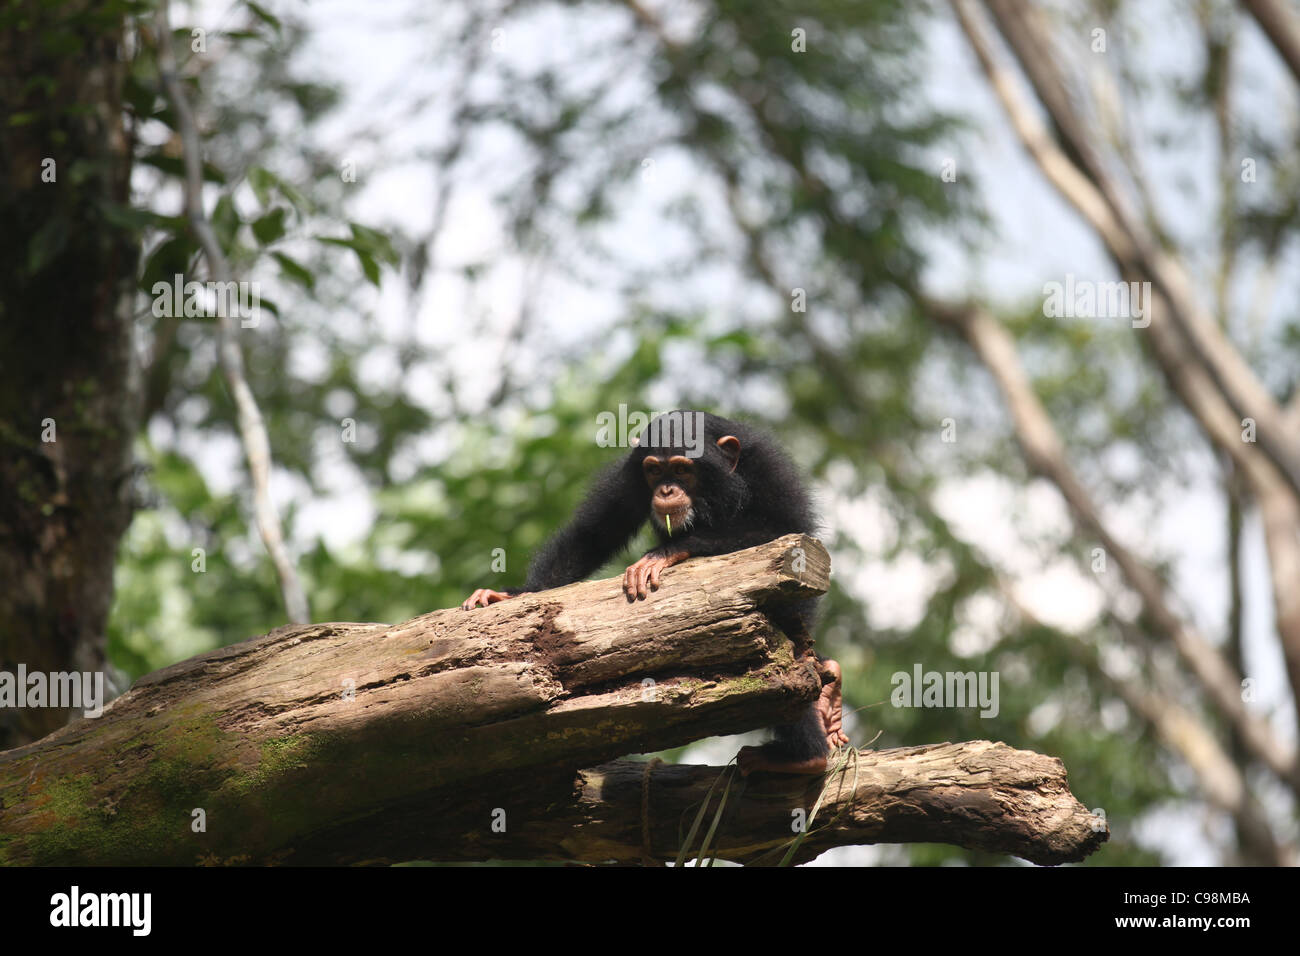 Chimpanzee exploring the wilderness of the forest Stock Photo